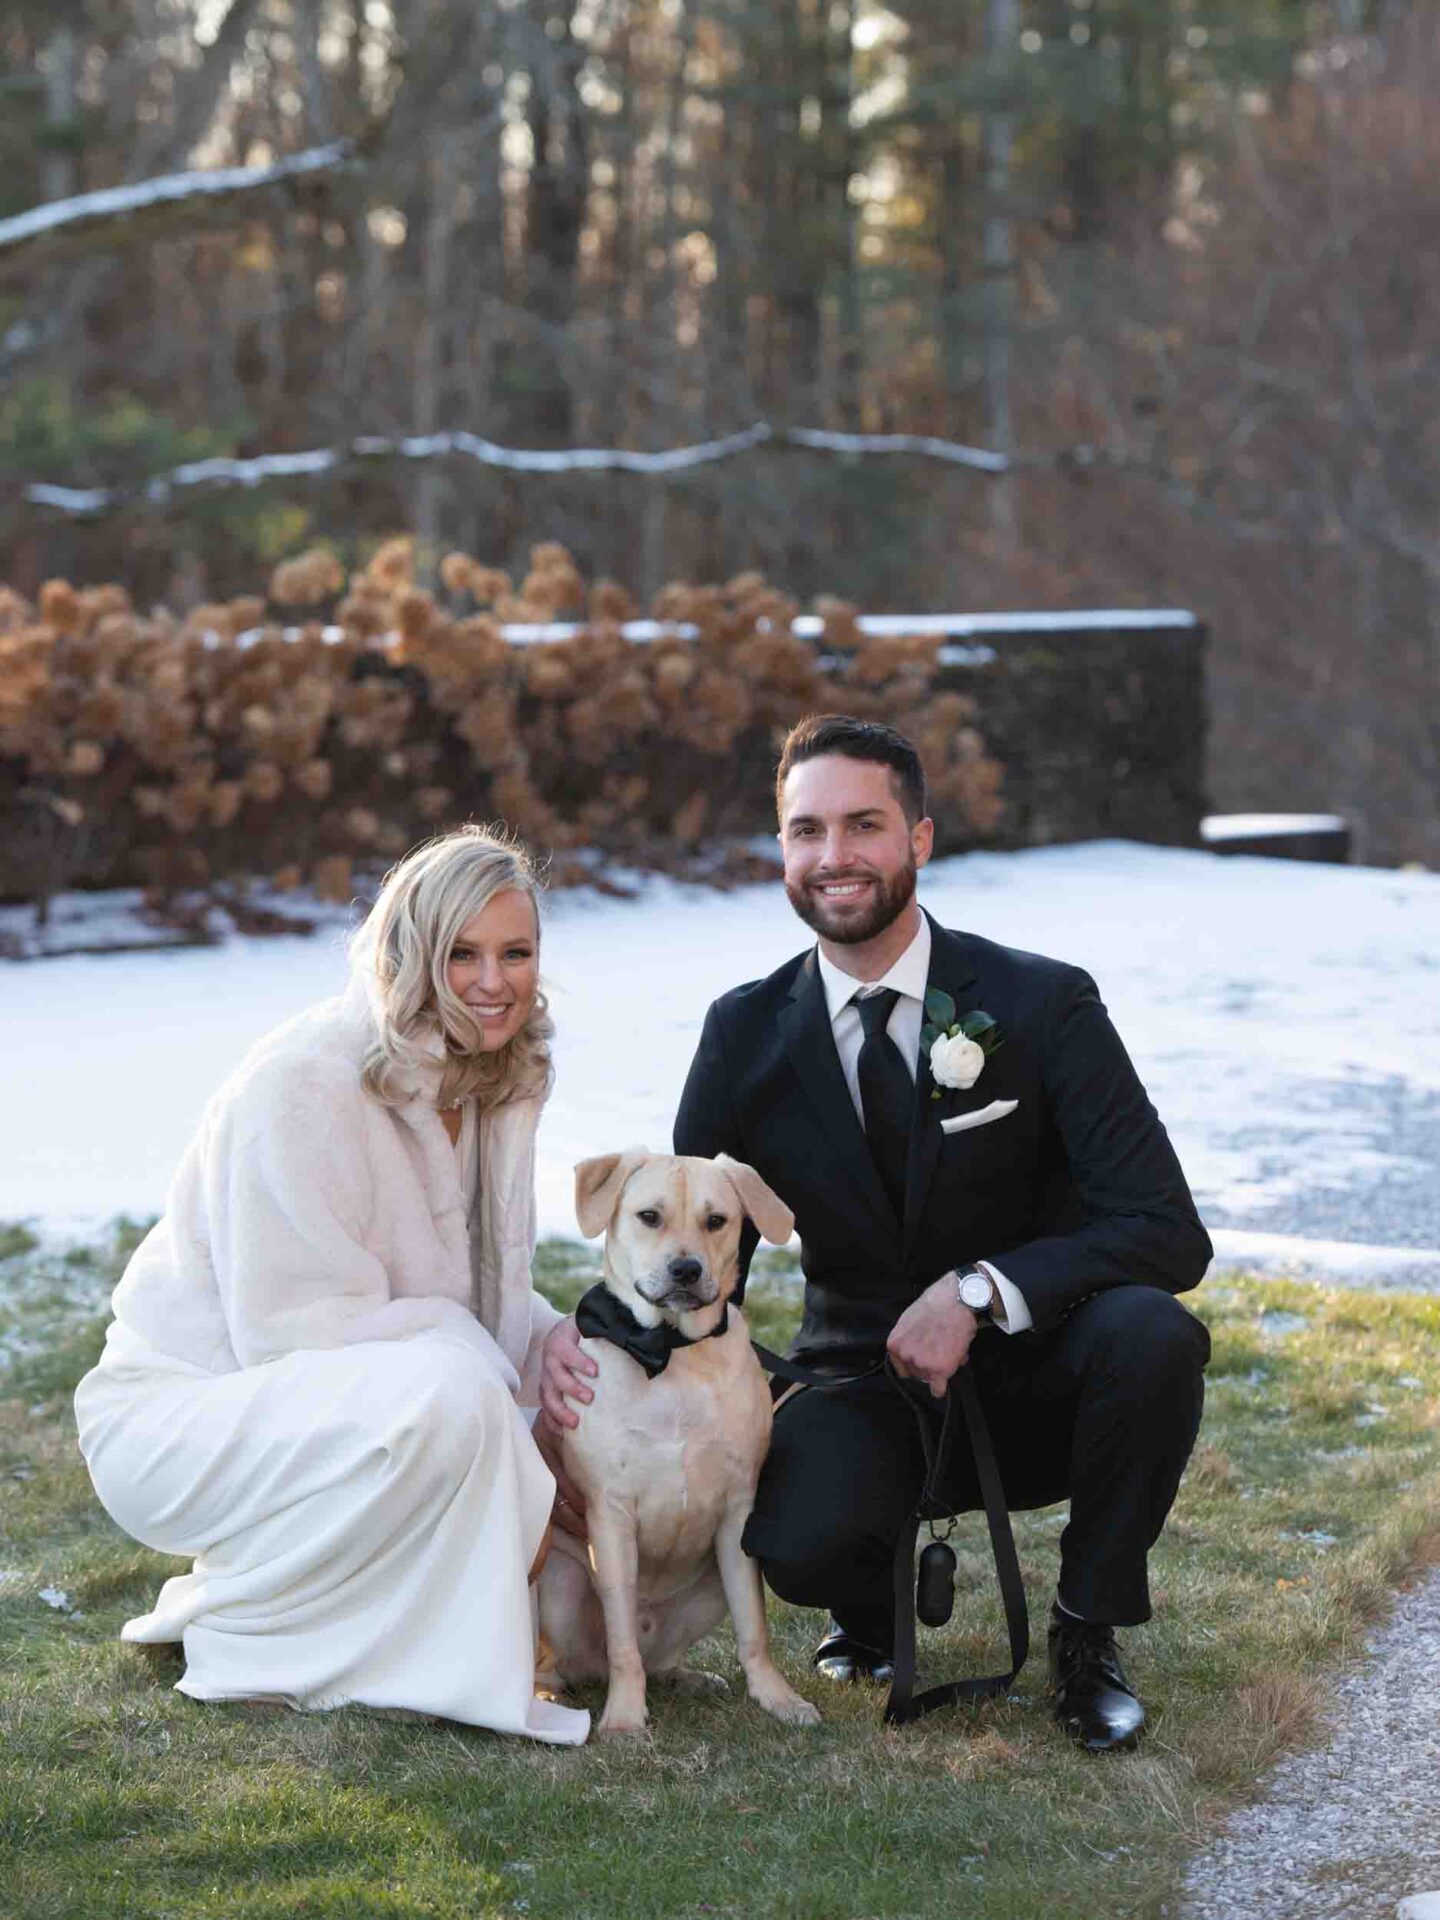 Bride and groom wedding portraits with puppy